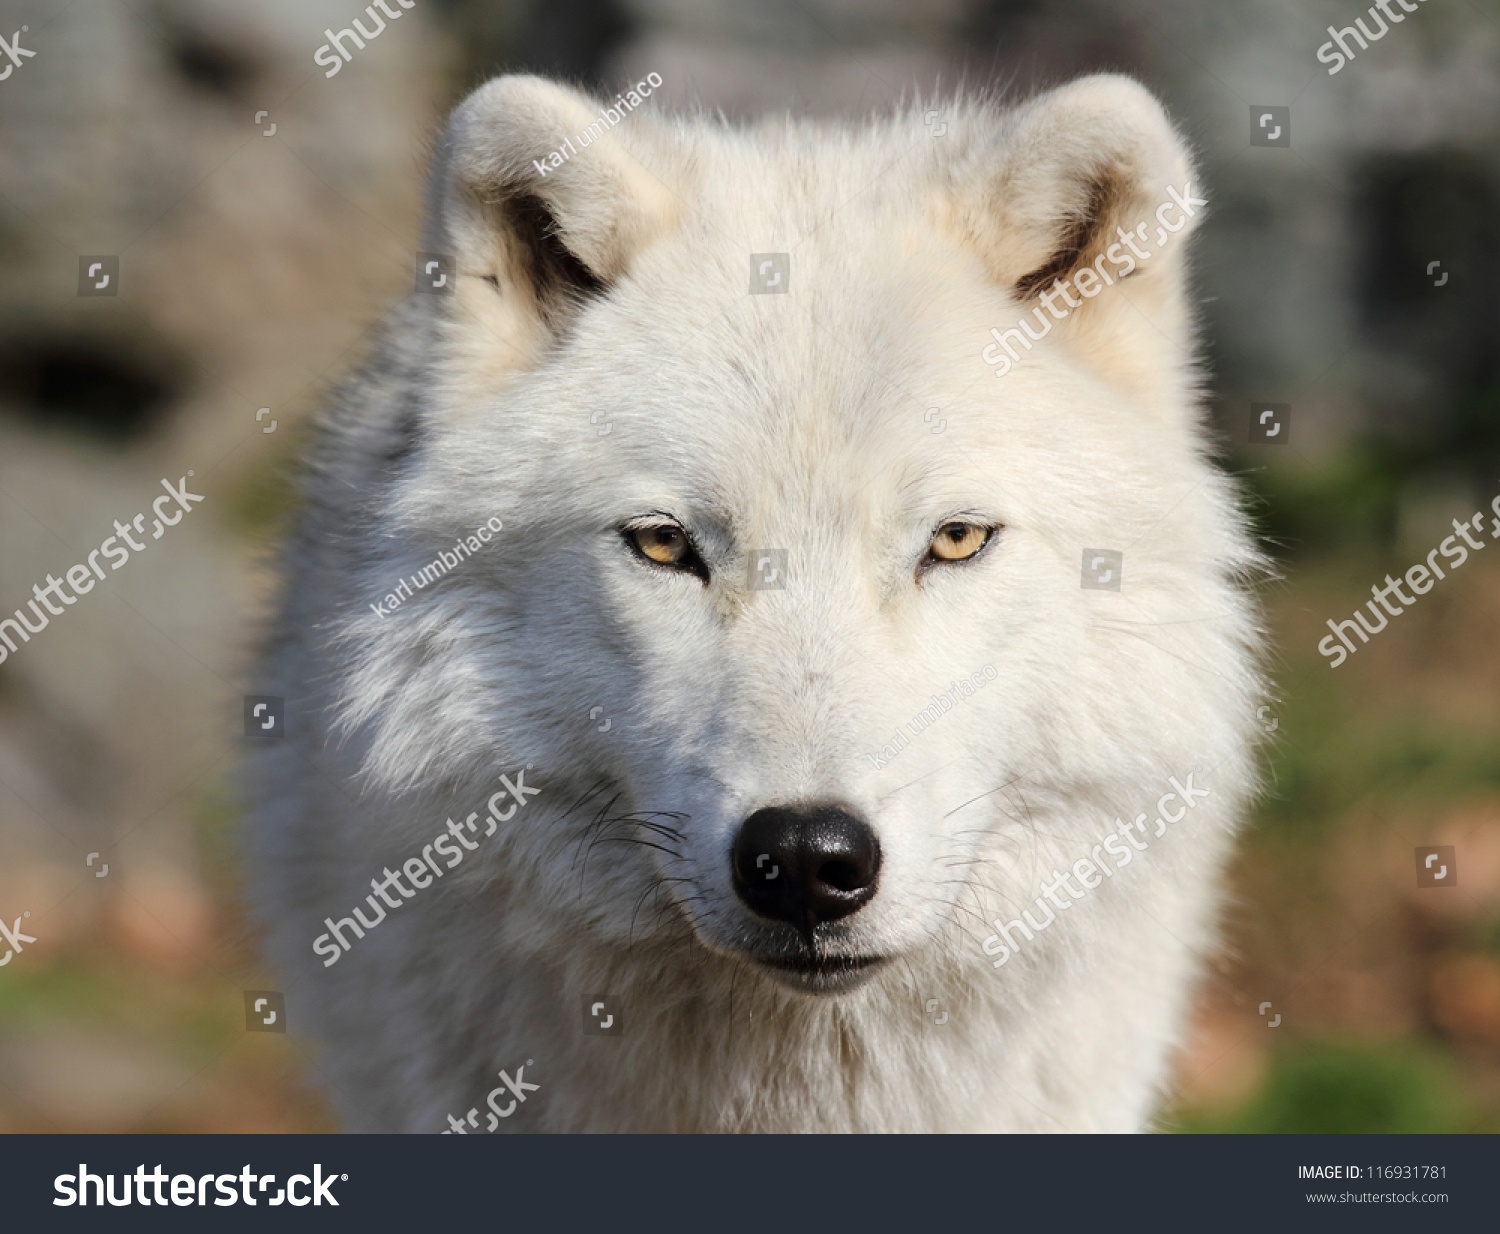 Face Of White Wolf Stock Photo 116931781 : Shutterstock